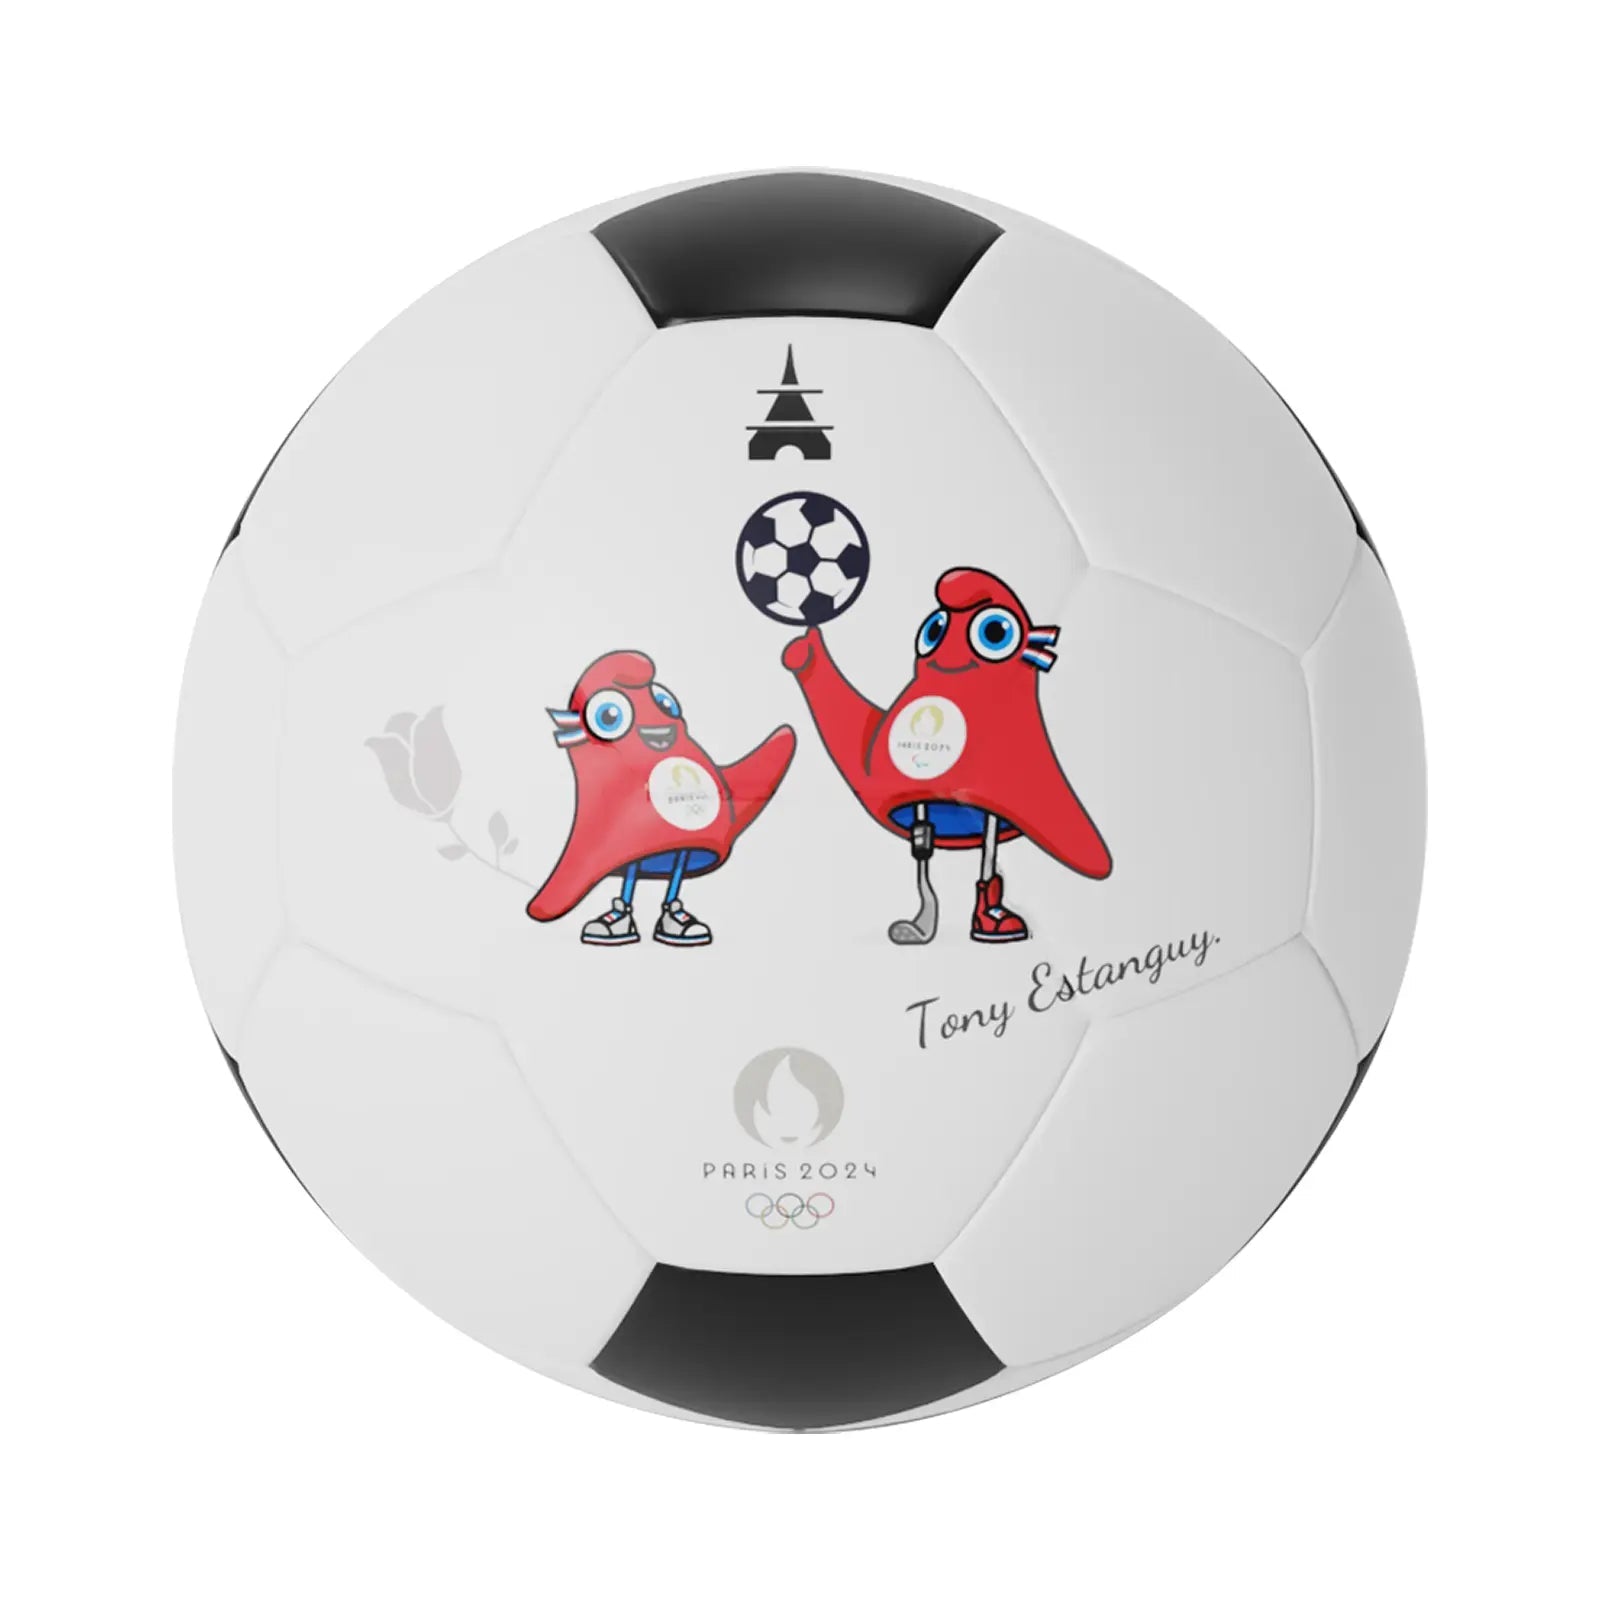 Personalized Custom Paris Olympics Themed Commemorative Soccer Ball - Family Watchs